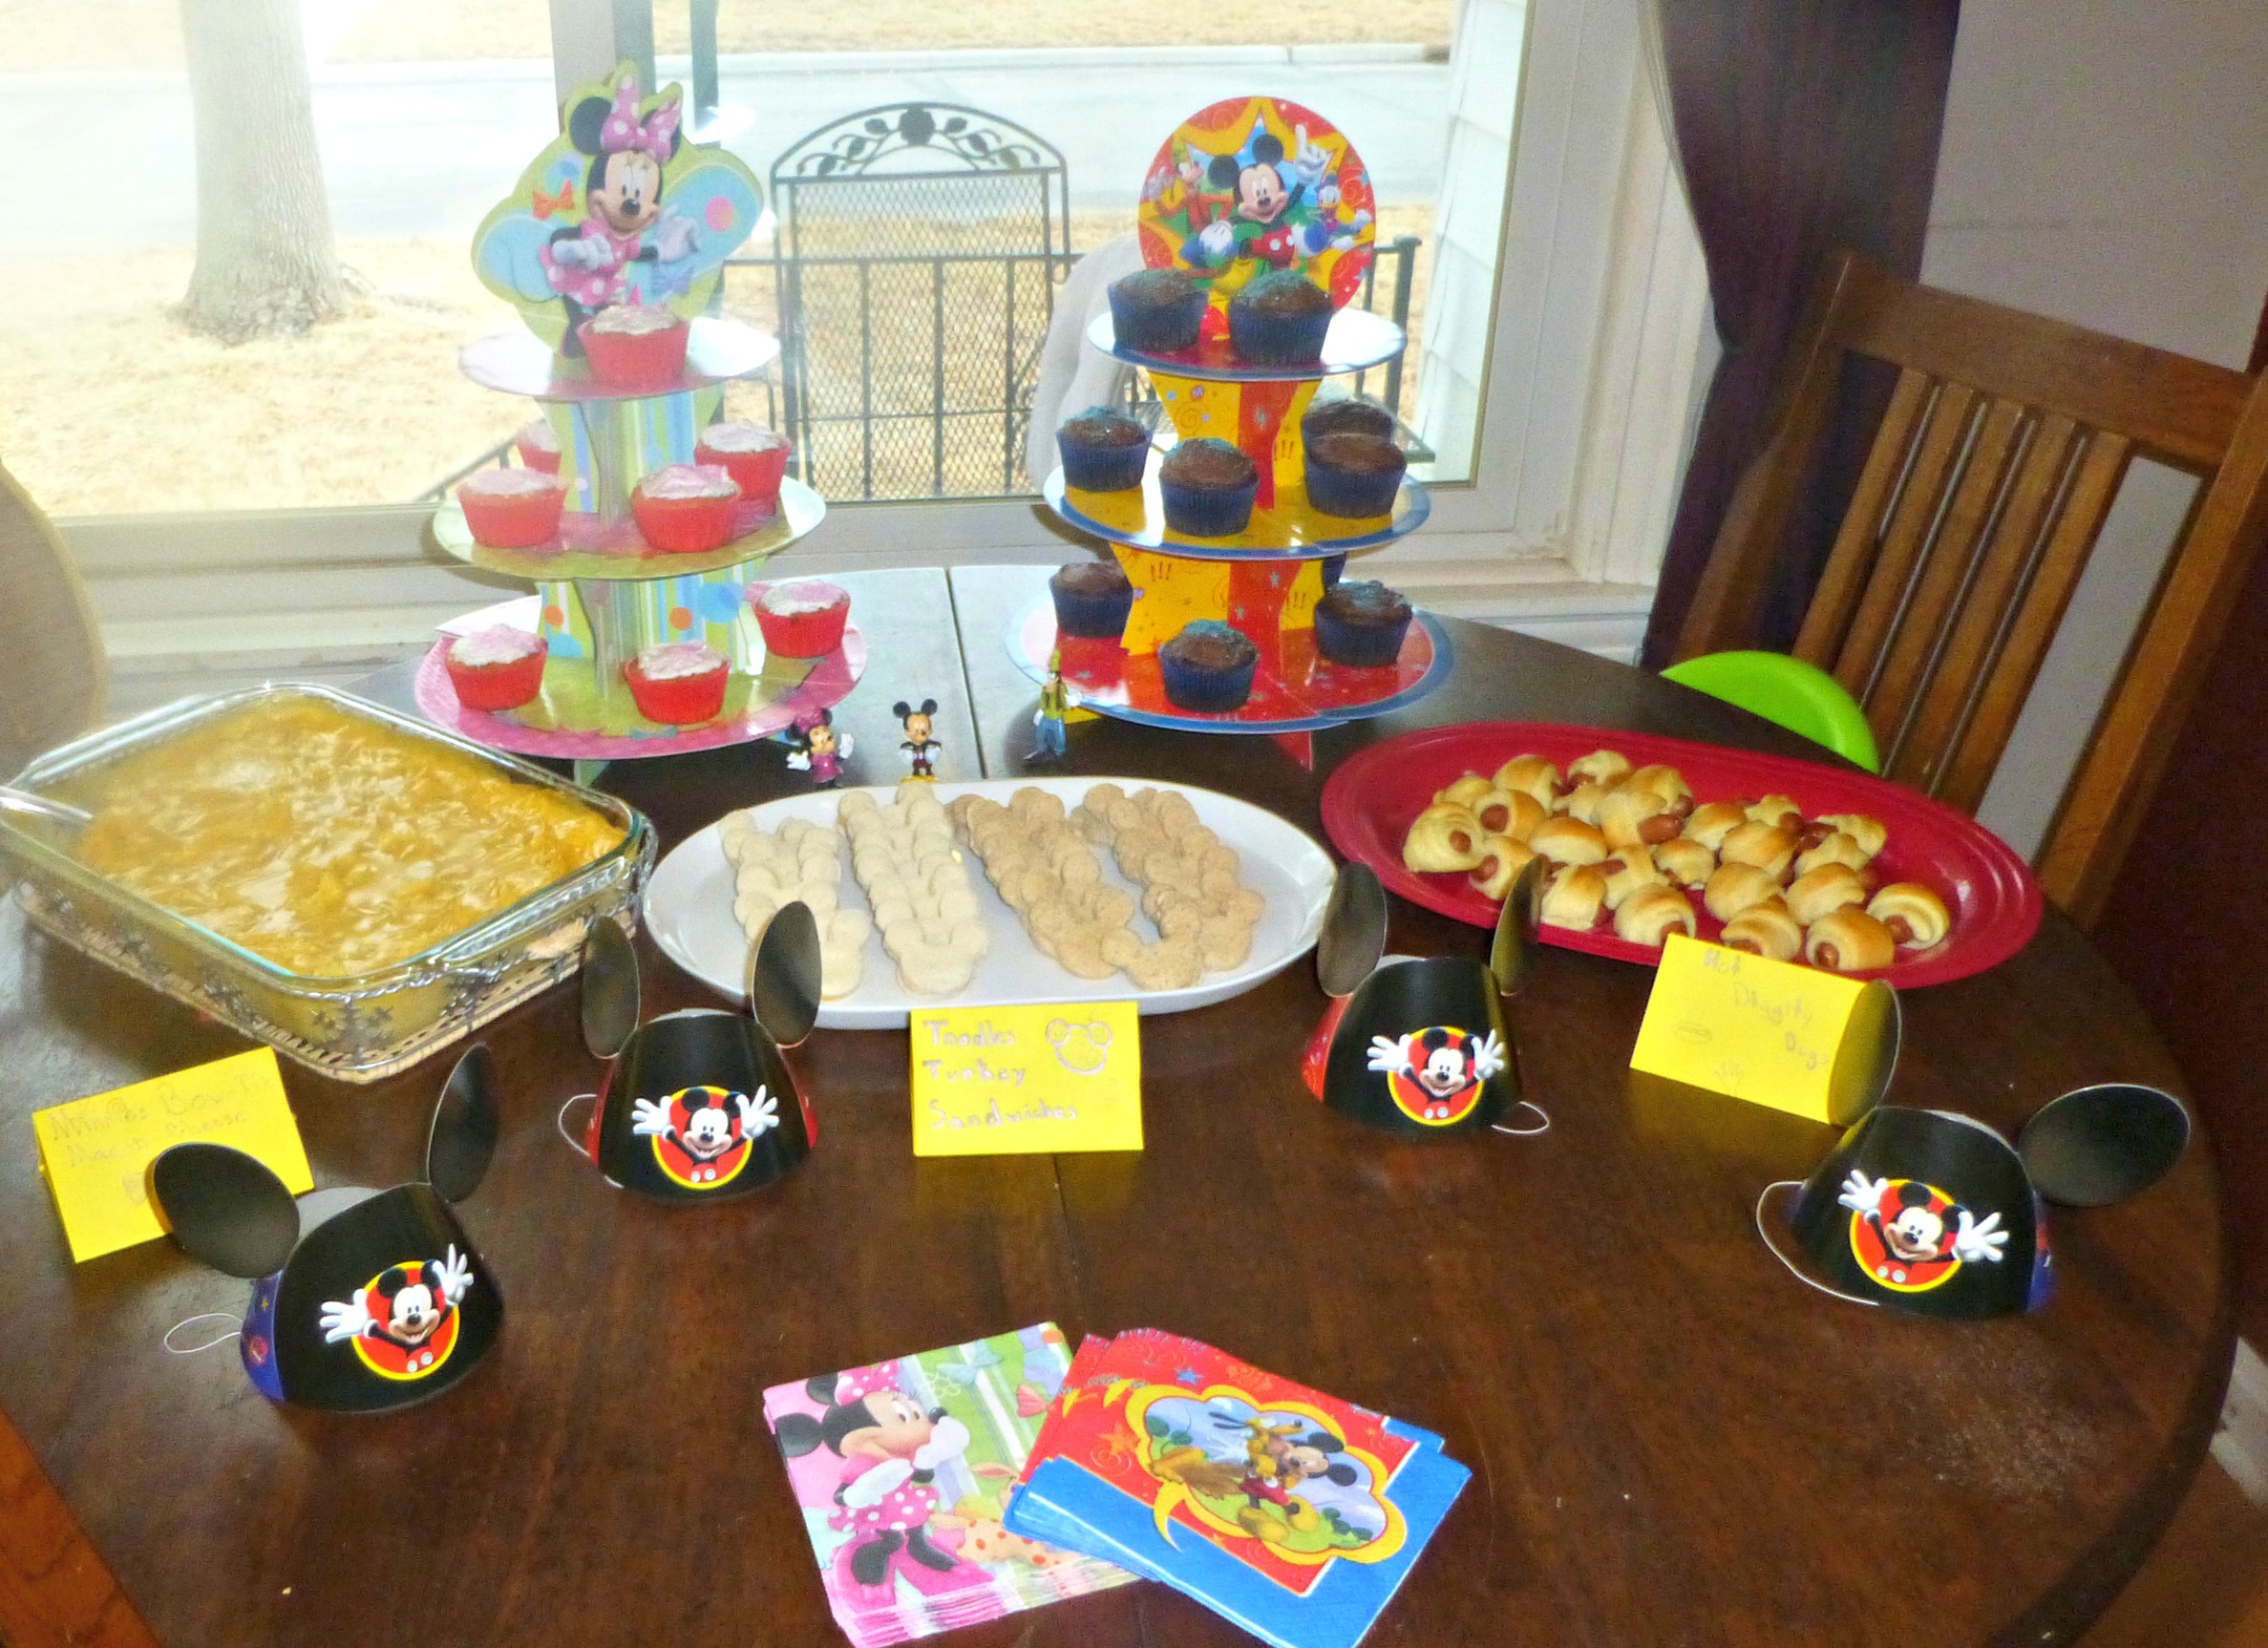 25 Of The Best Ideas For Mickey Mouse Clubhouse Birthday Party | Images ...